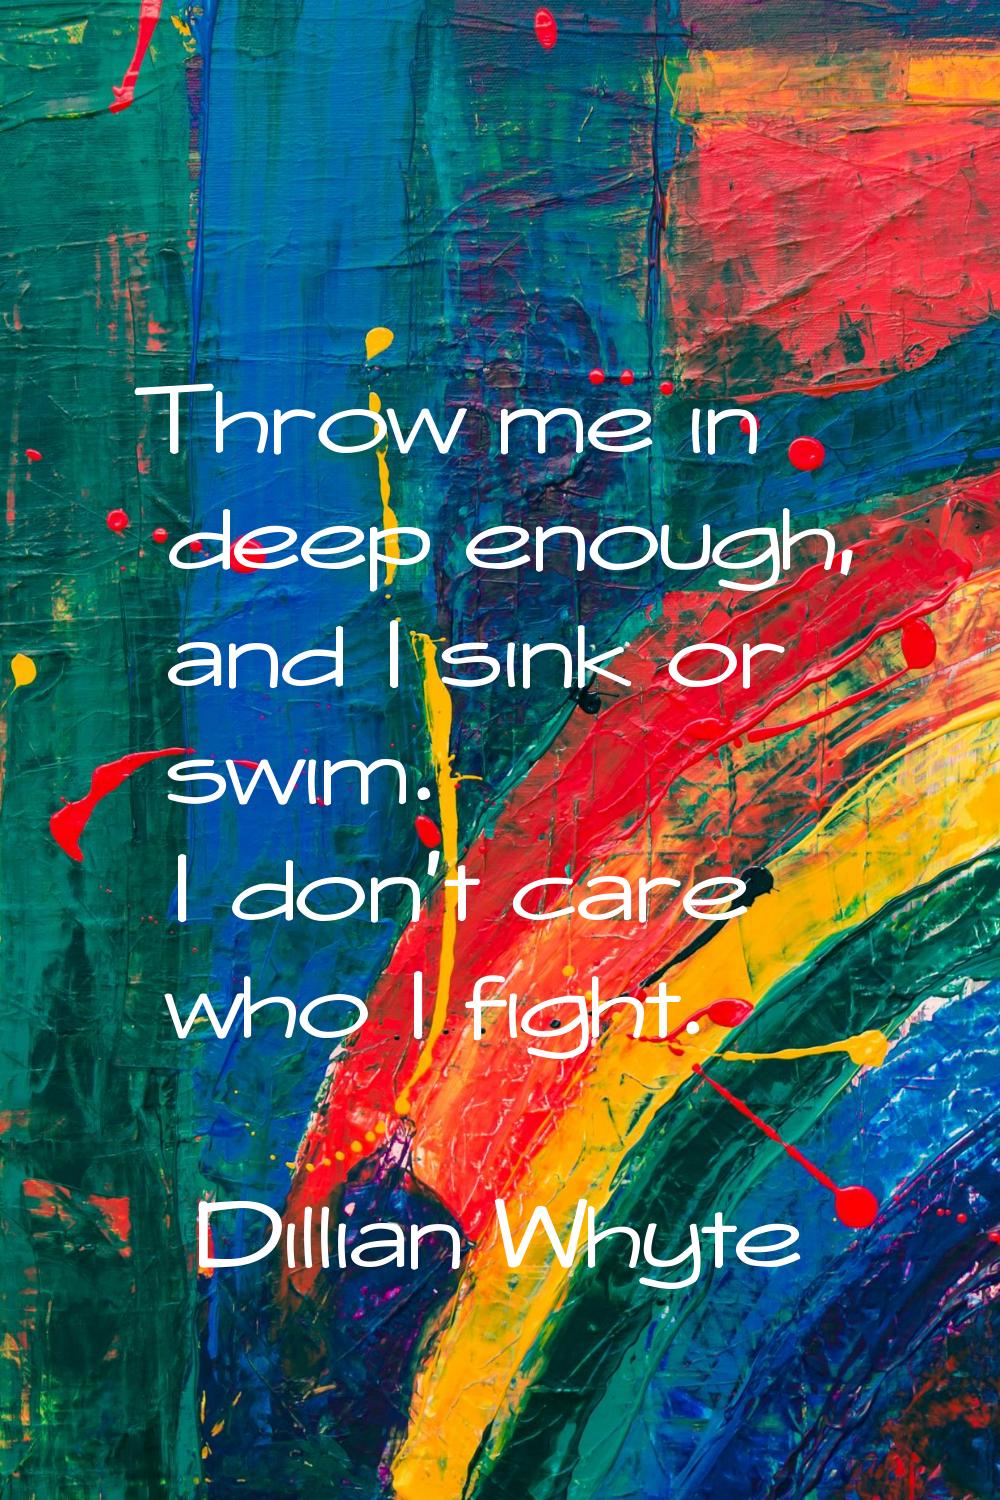 Throw me in deep enough, and I sink or swim. I don't care who I fight.